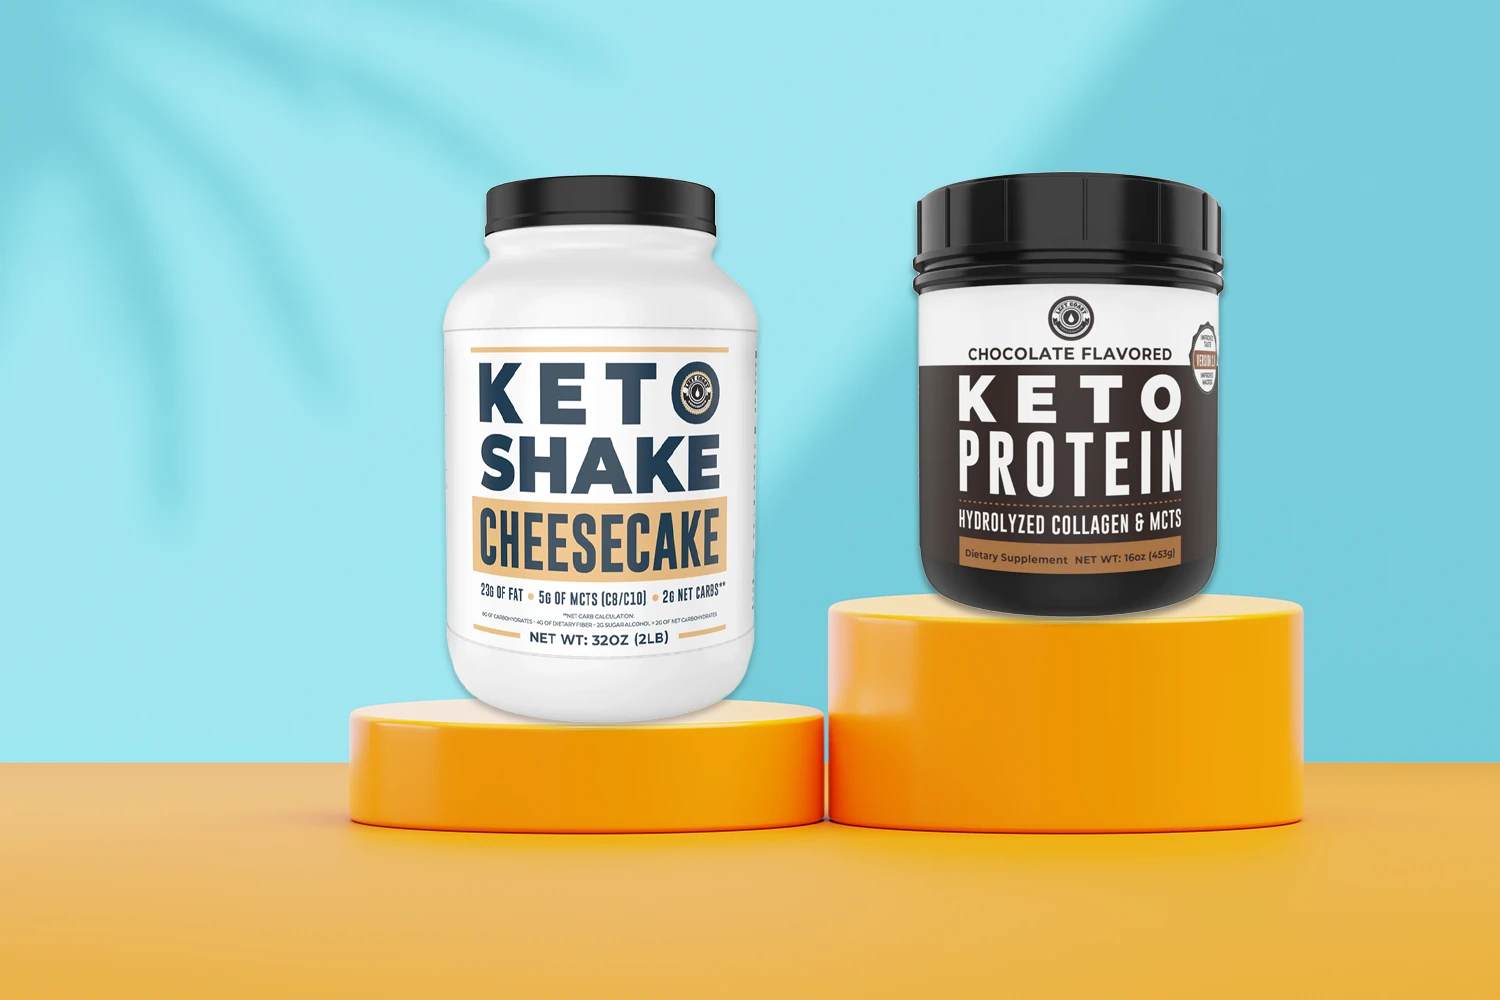 Left Coast Performance Keto Cheesecake Shake: Hit or Miss? - Reviewology